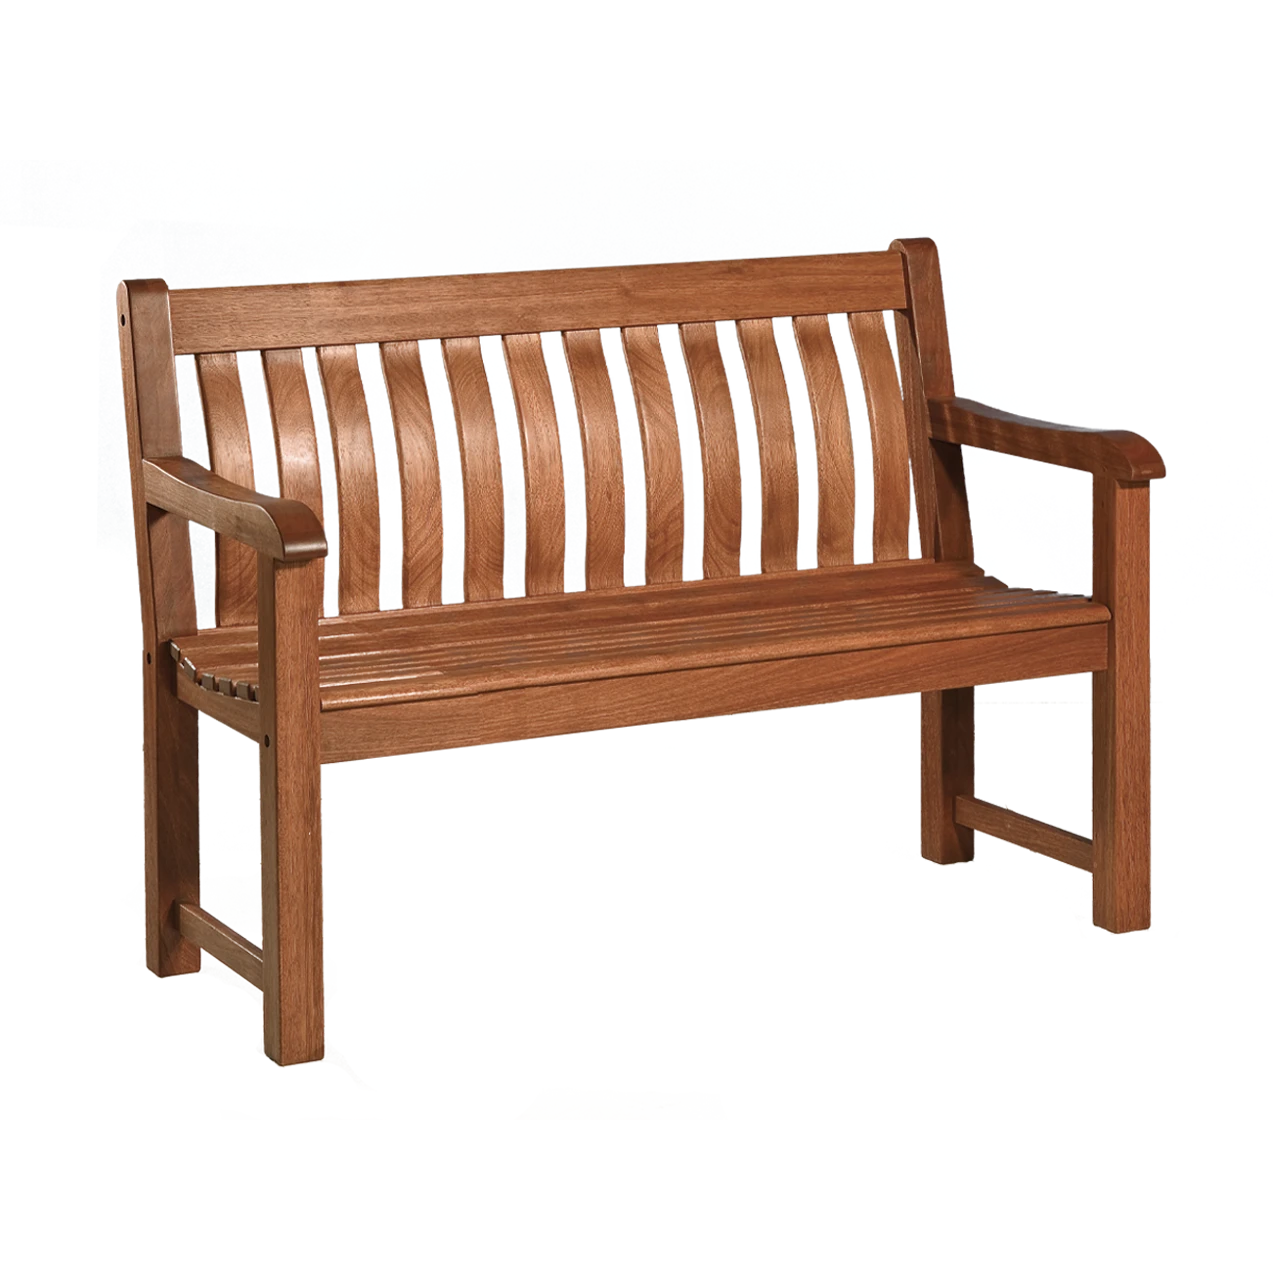 Alexander Rose St George Oiled Mahogany Bench 4ft